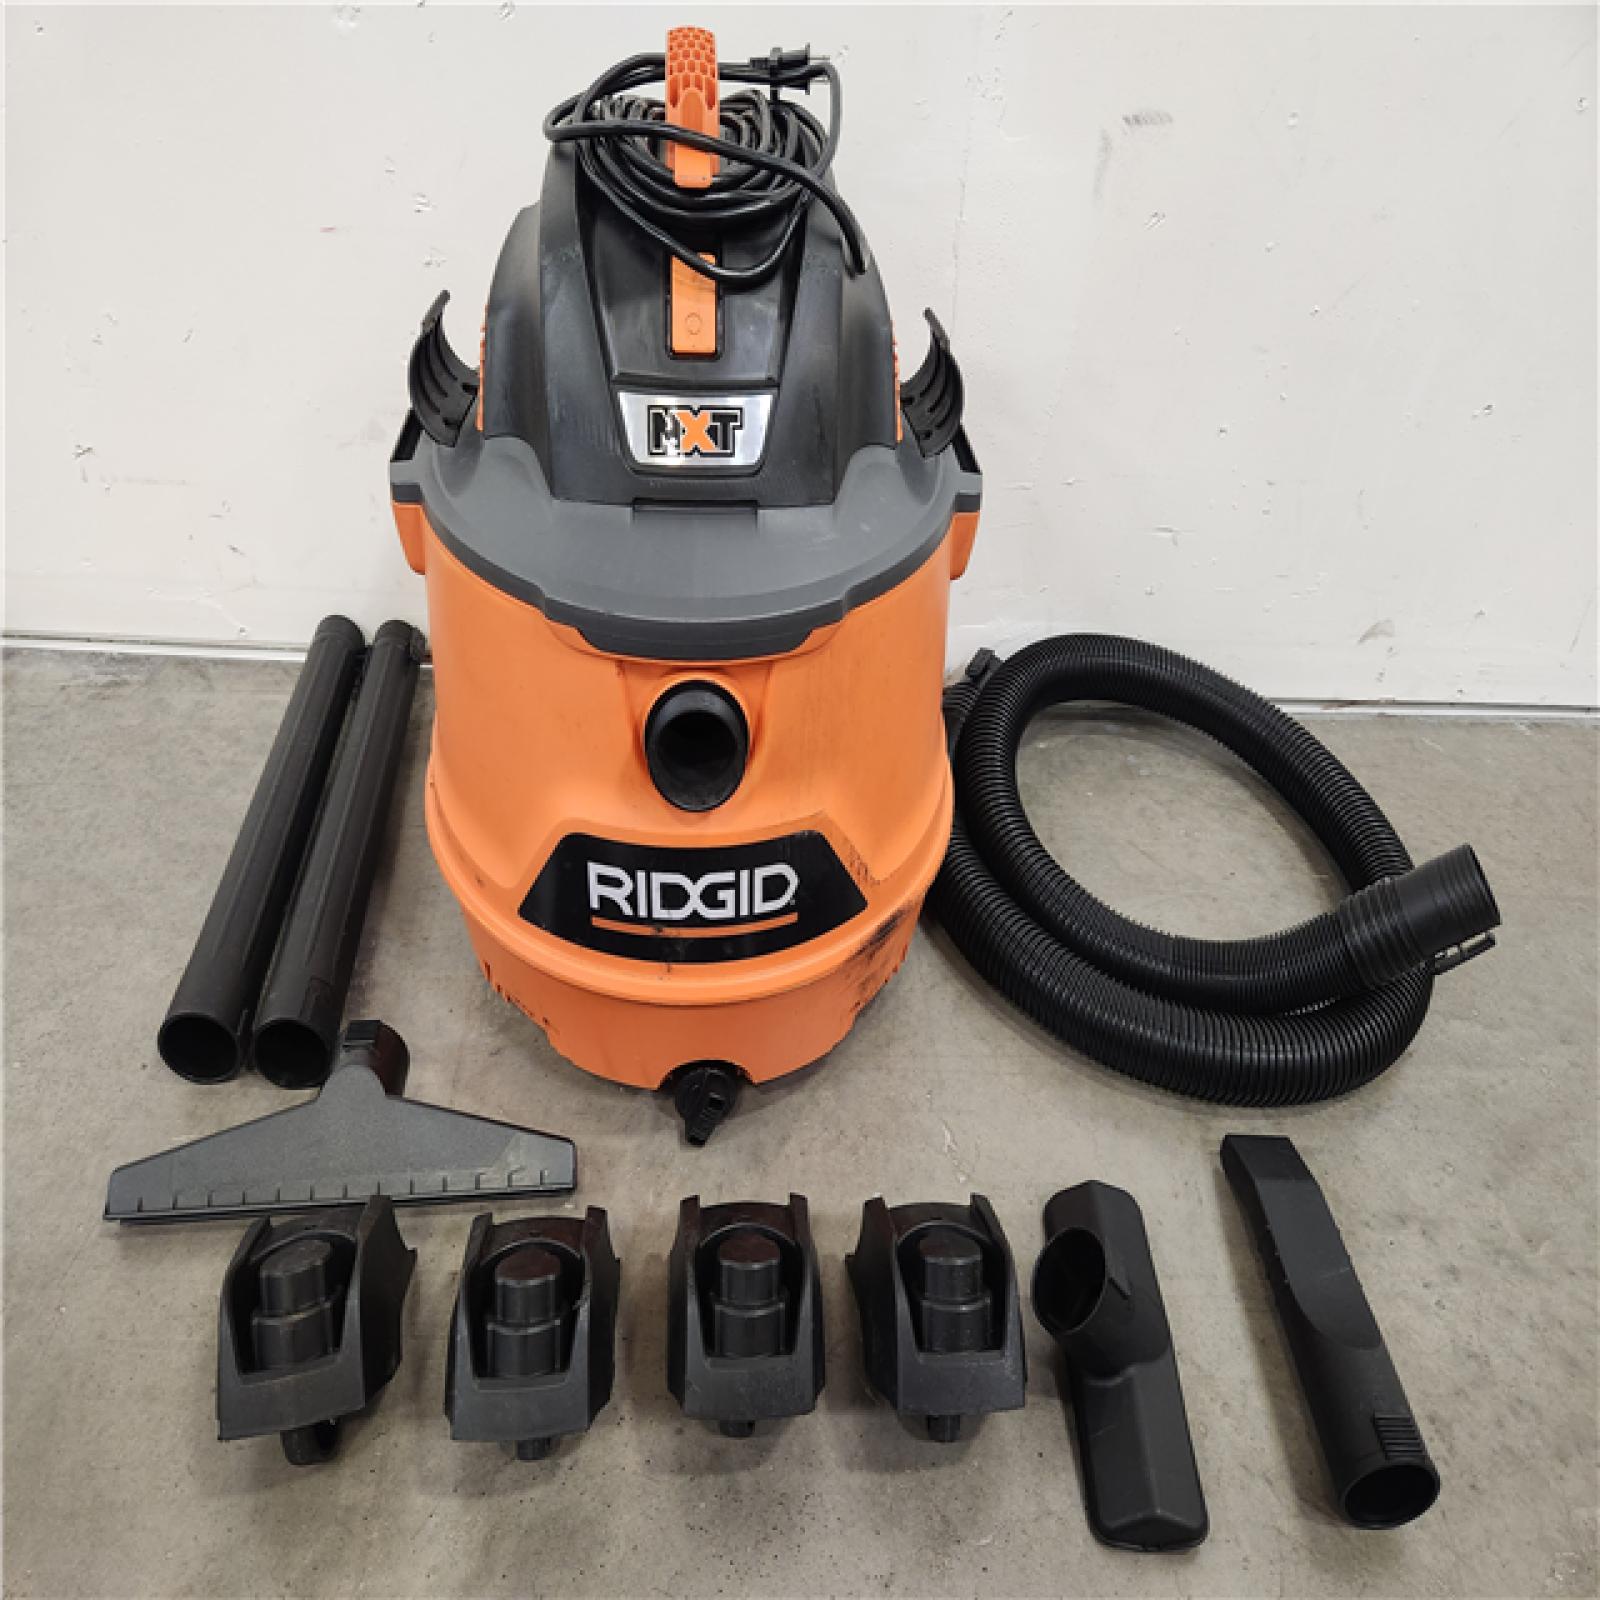 Phoenix Location LIKE NEW RIDGID 14 Gallon 6.0 Peak HP NXT Wet/Dry Shop Vacuum with Locking Hose and Accessories (No Filter)